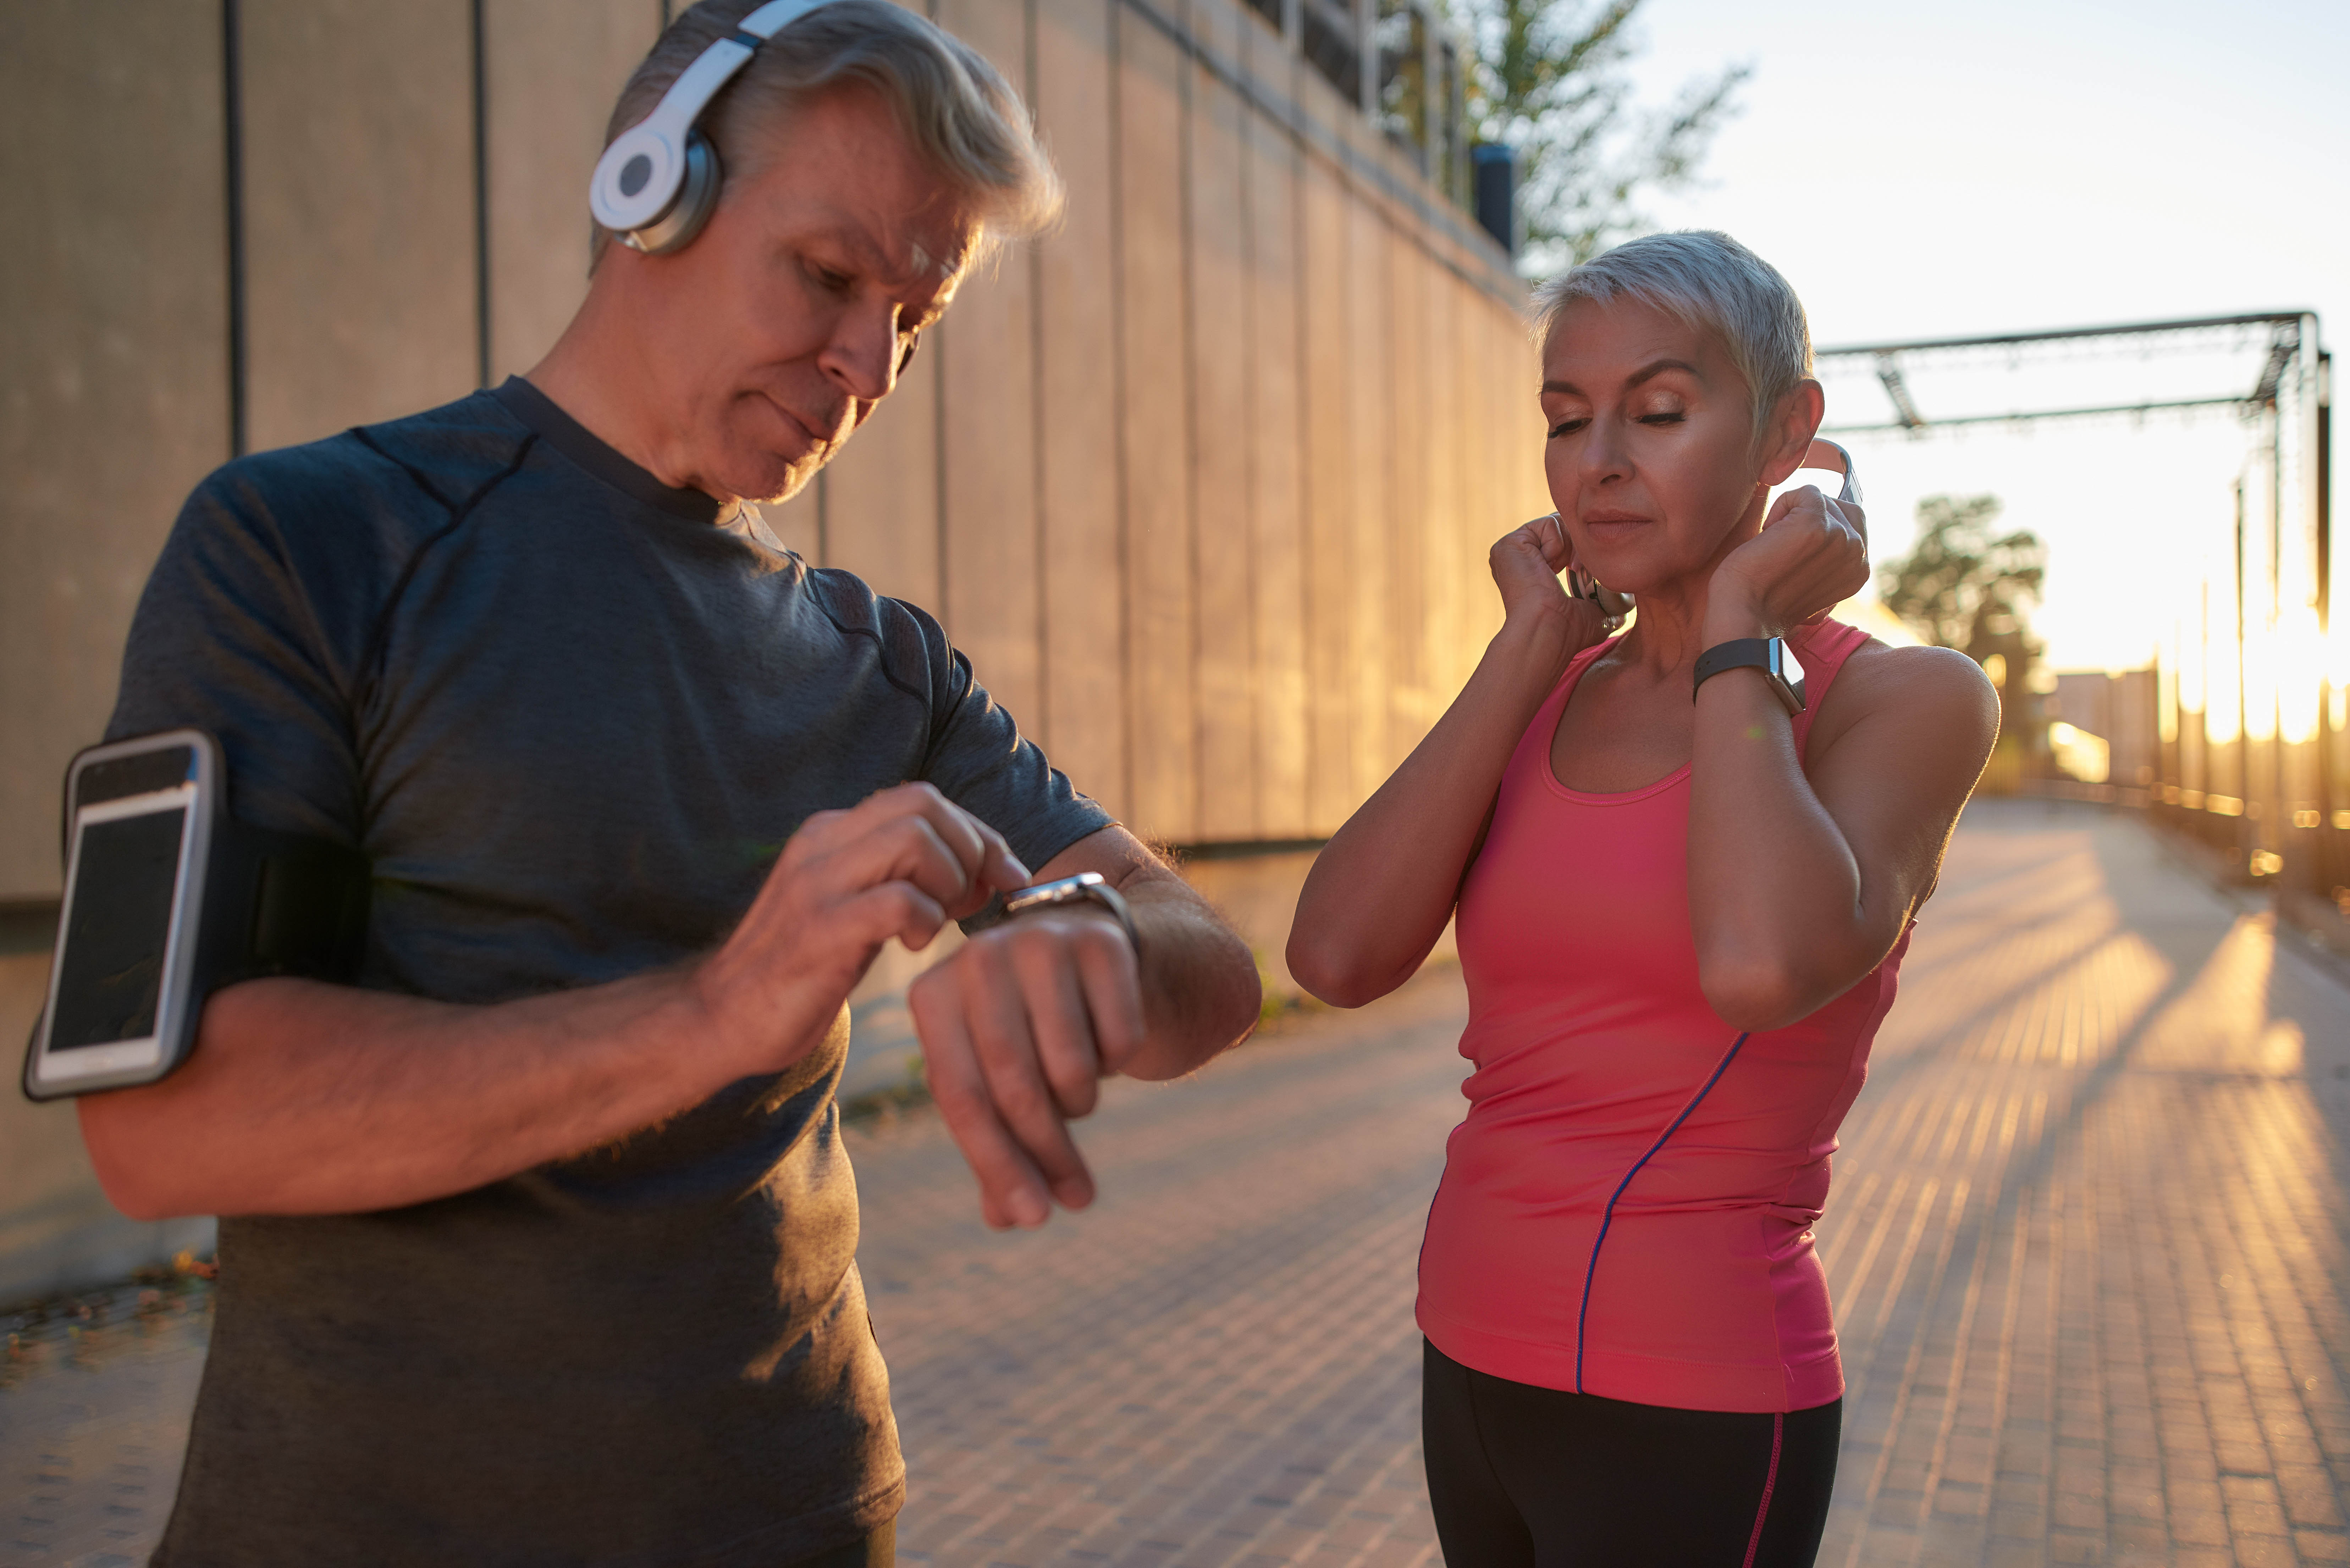 Older couple preparing for a run. He's wearing headphones and setting his smart watch. She has her eyes closed and is putting on her headphones, wearing a pink shirt.